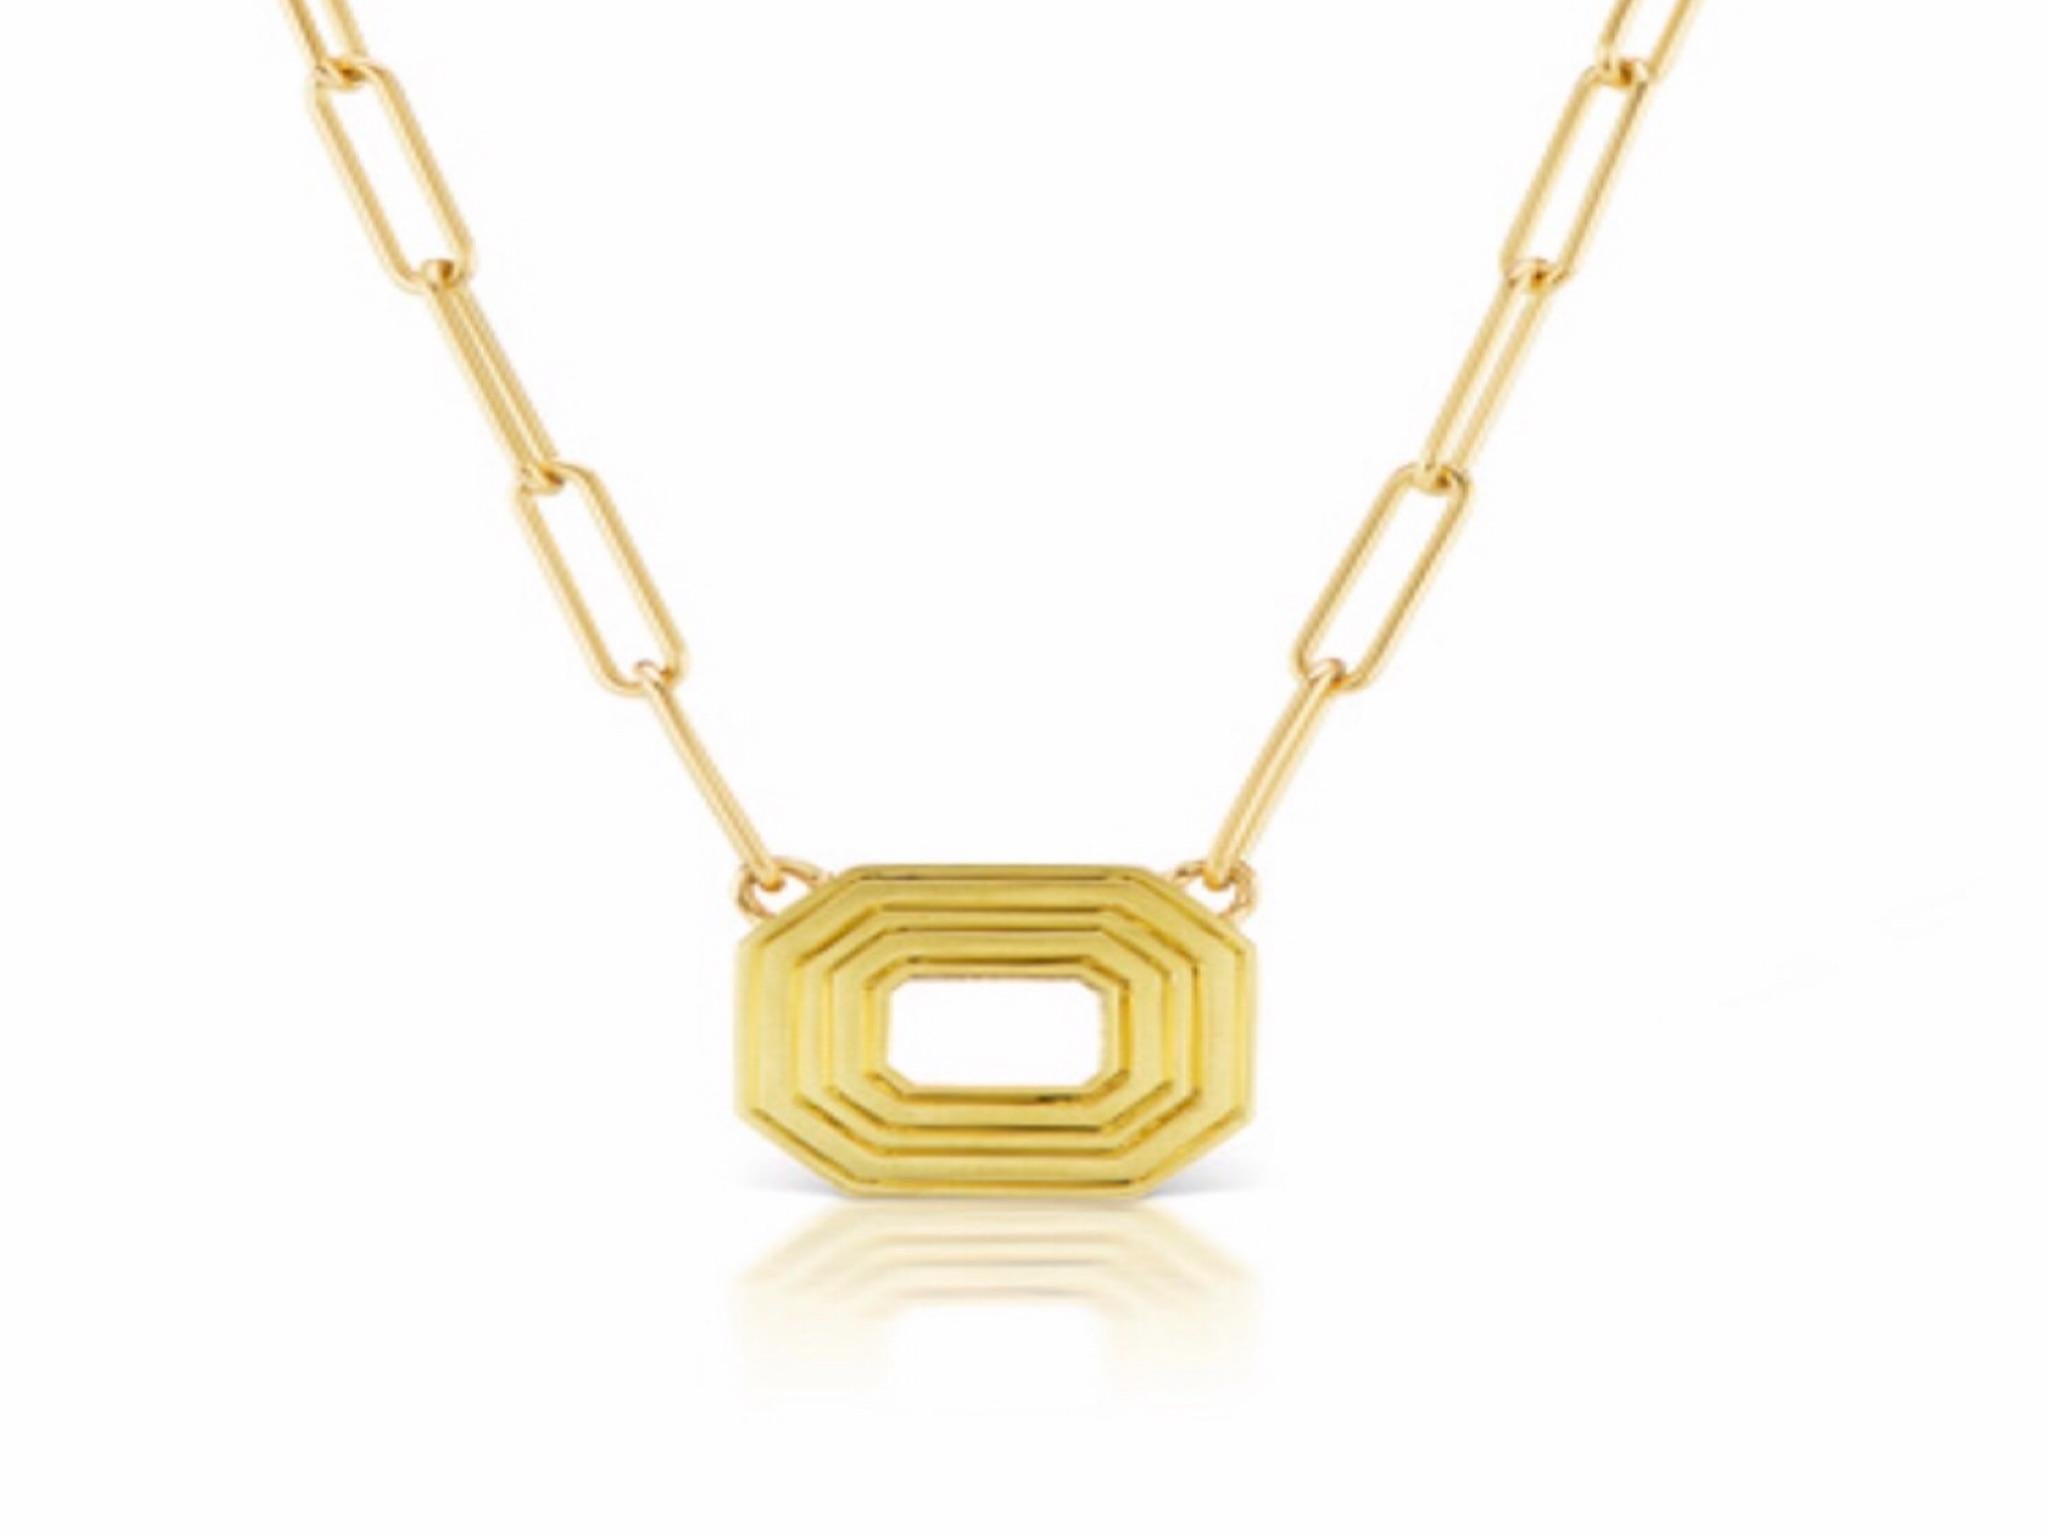 Reverse Gold Necklace in Black Enamel and 18 Karat Yellow Gold In New Condition For Sale In Dallas, TX